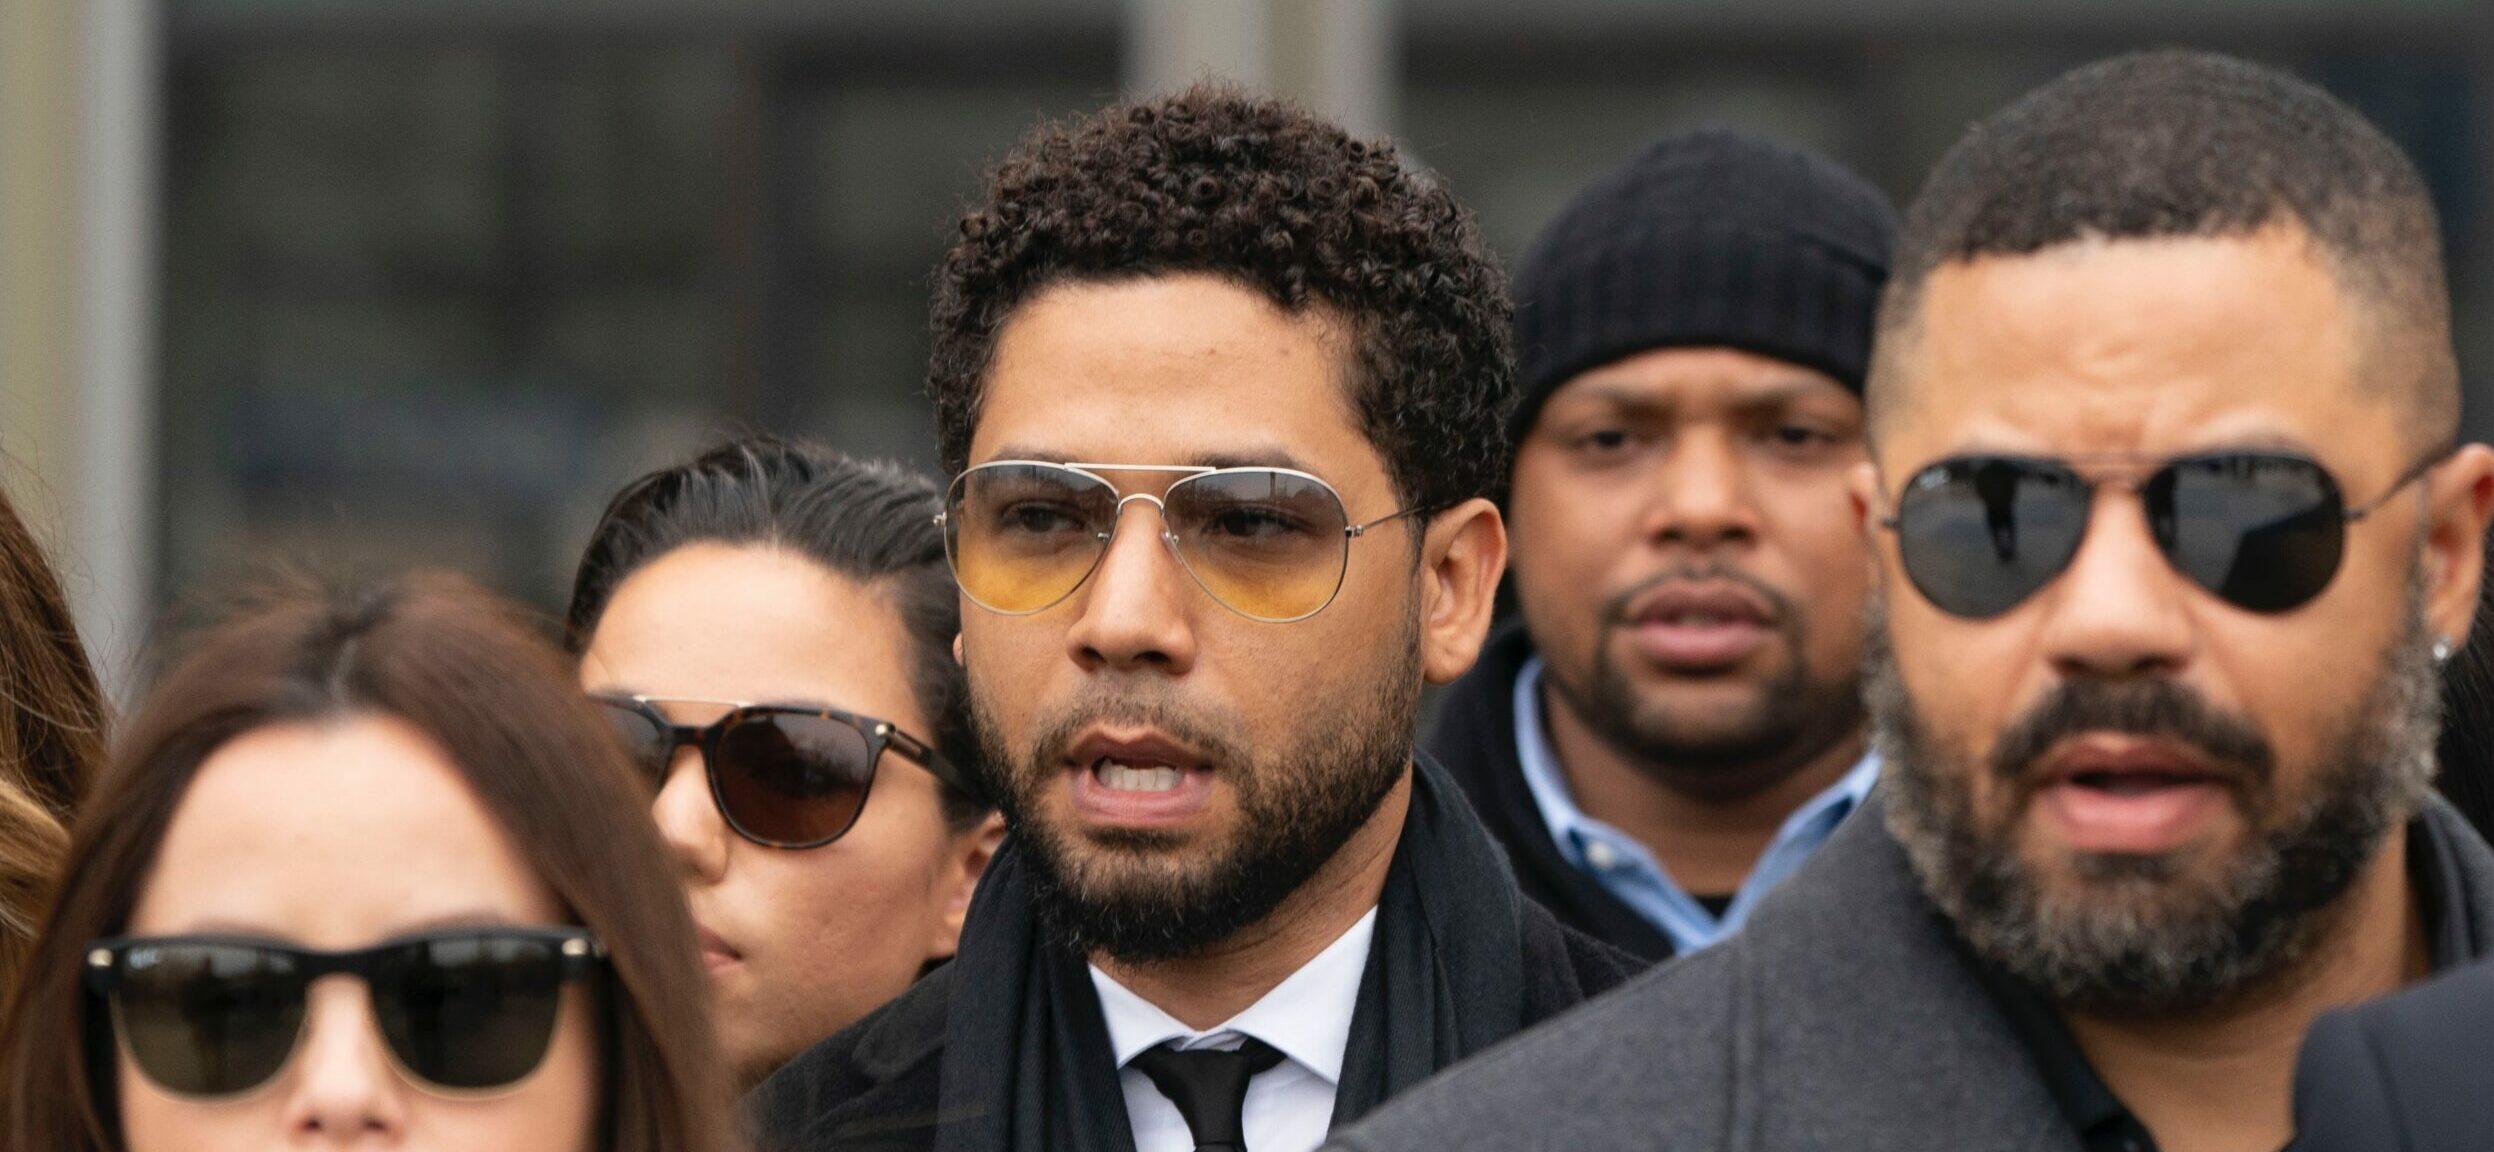 Jussie Smollett Checks Into Rehab Due To ‘Extremely’ Difficult Years